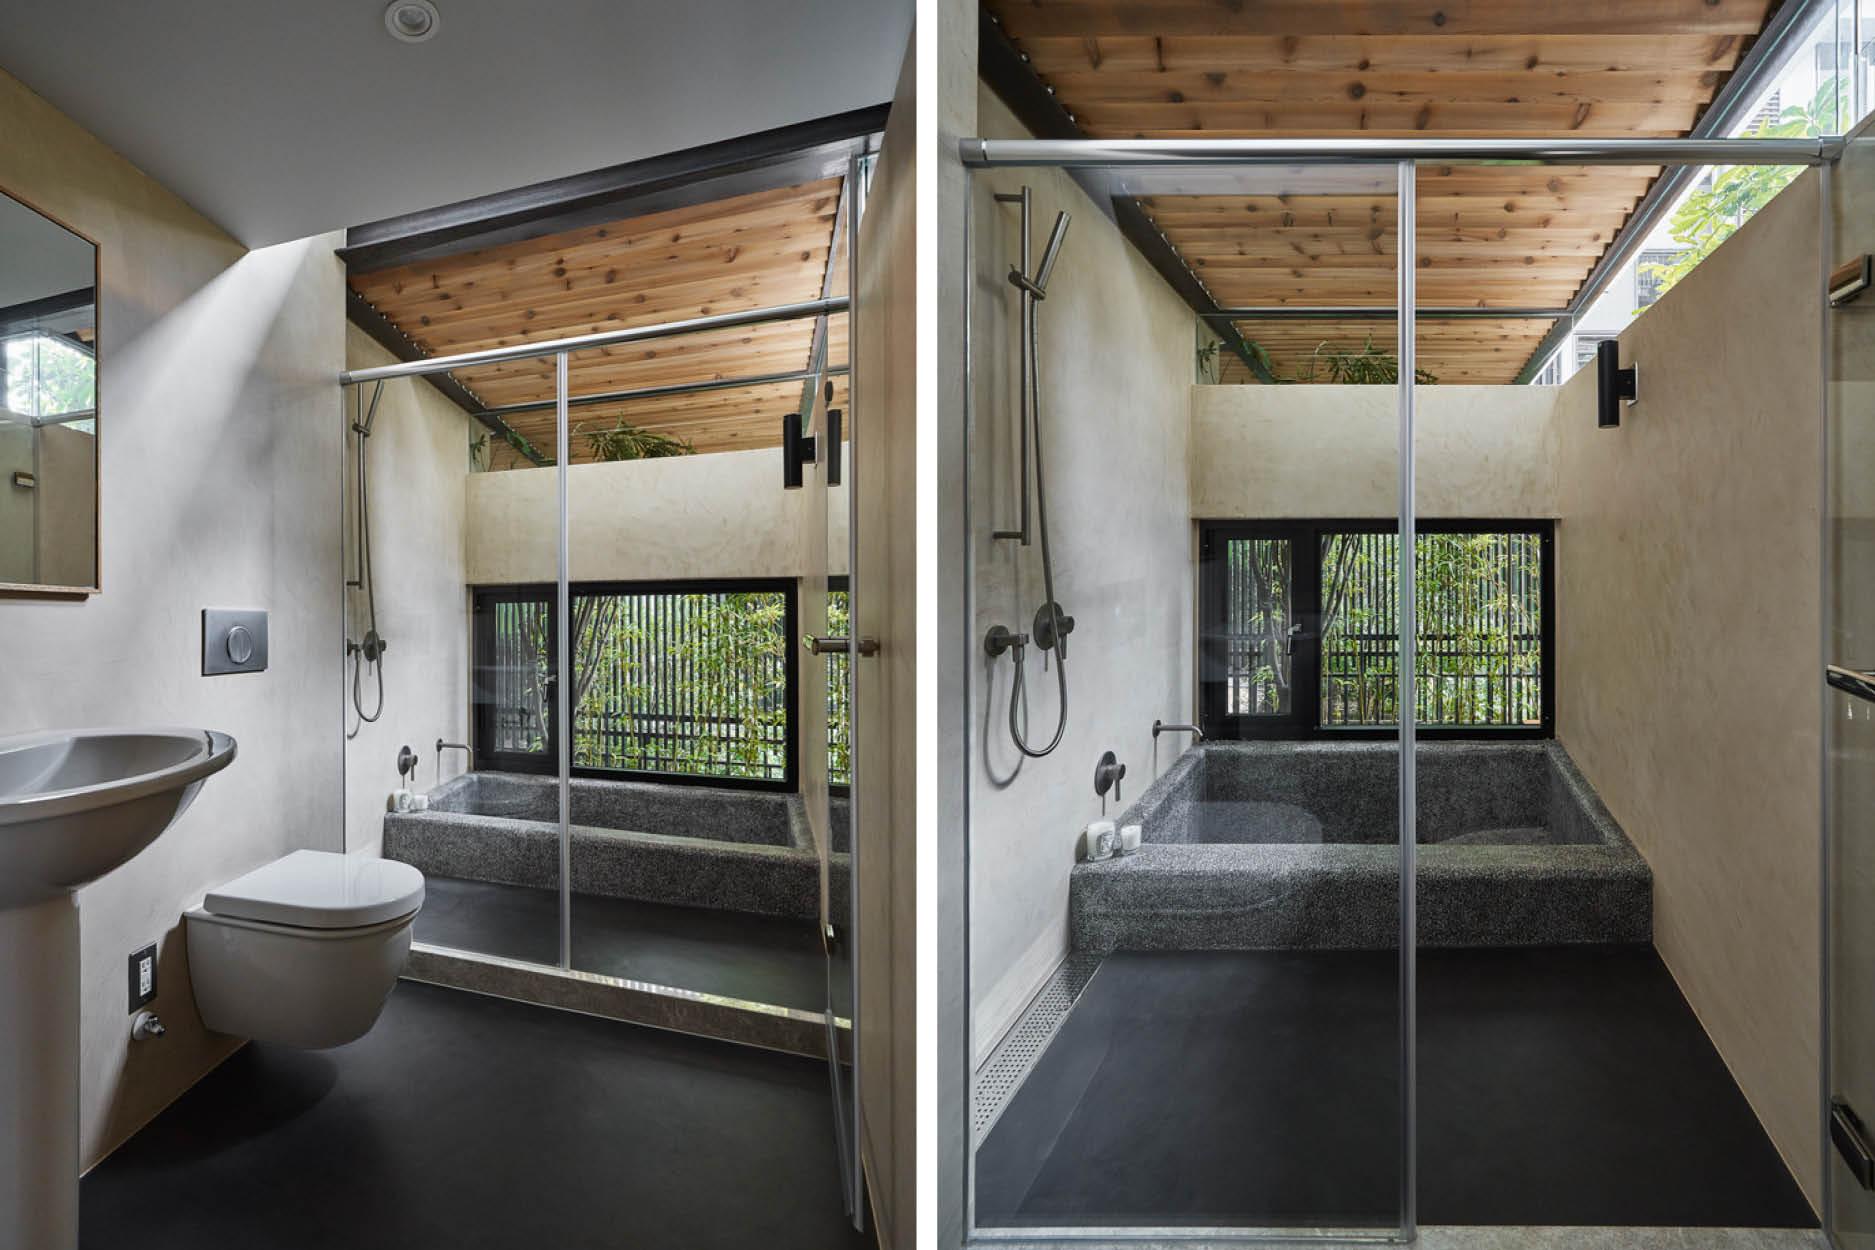 Inside a Tranquil Residence in Taiwan that Mimics a Treehouse